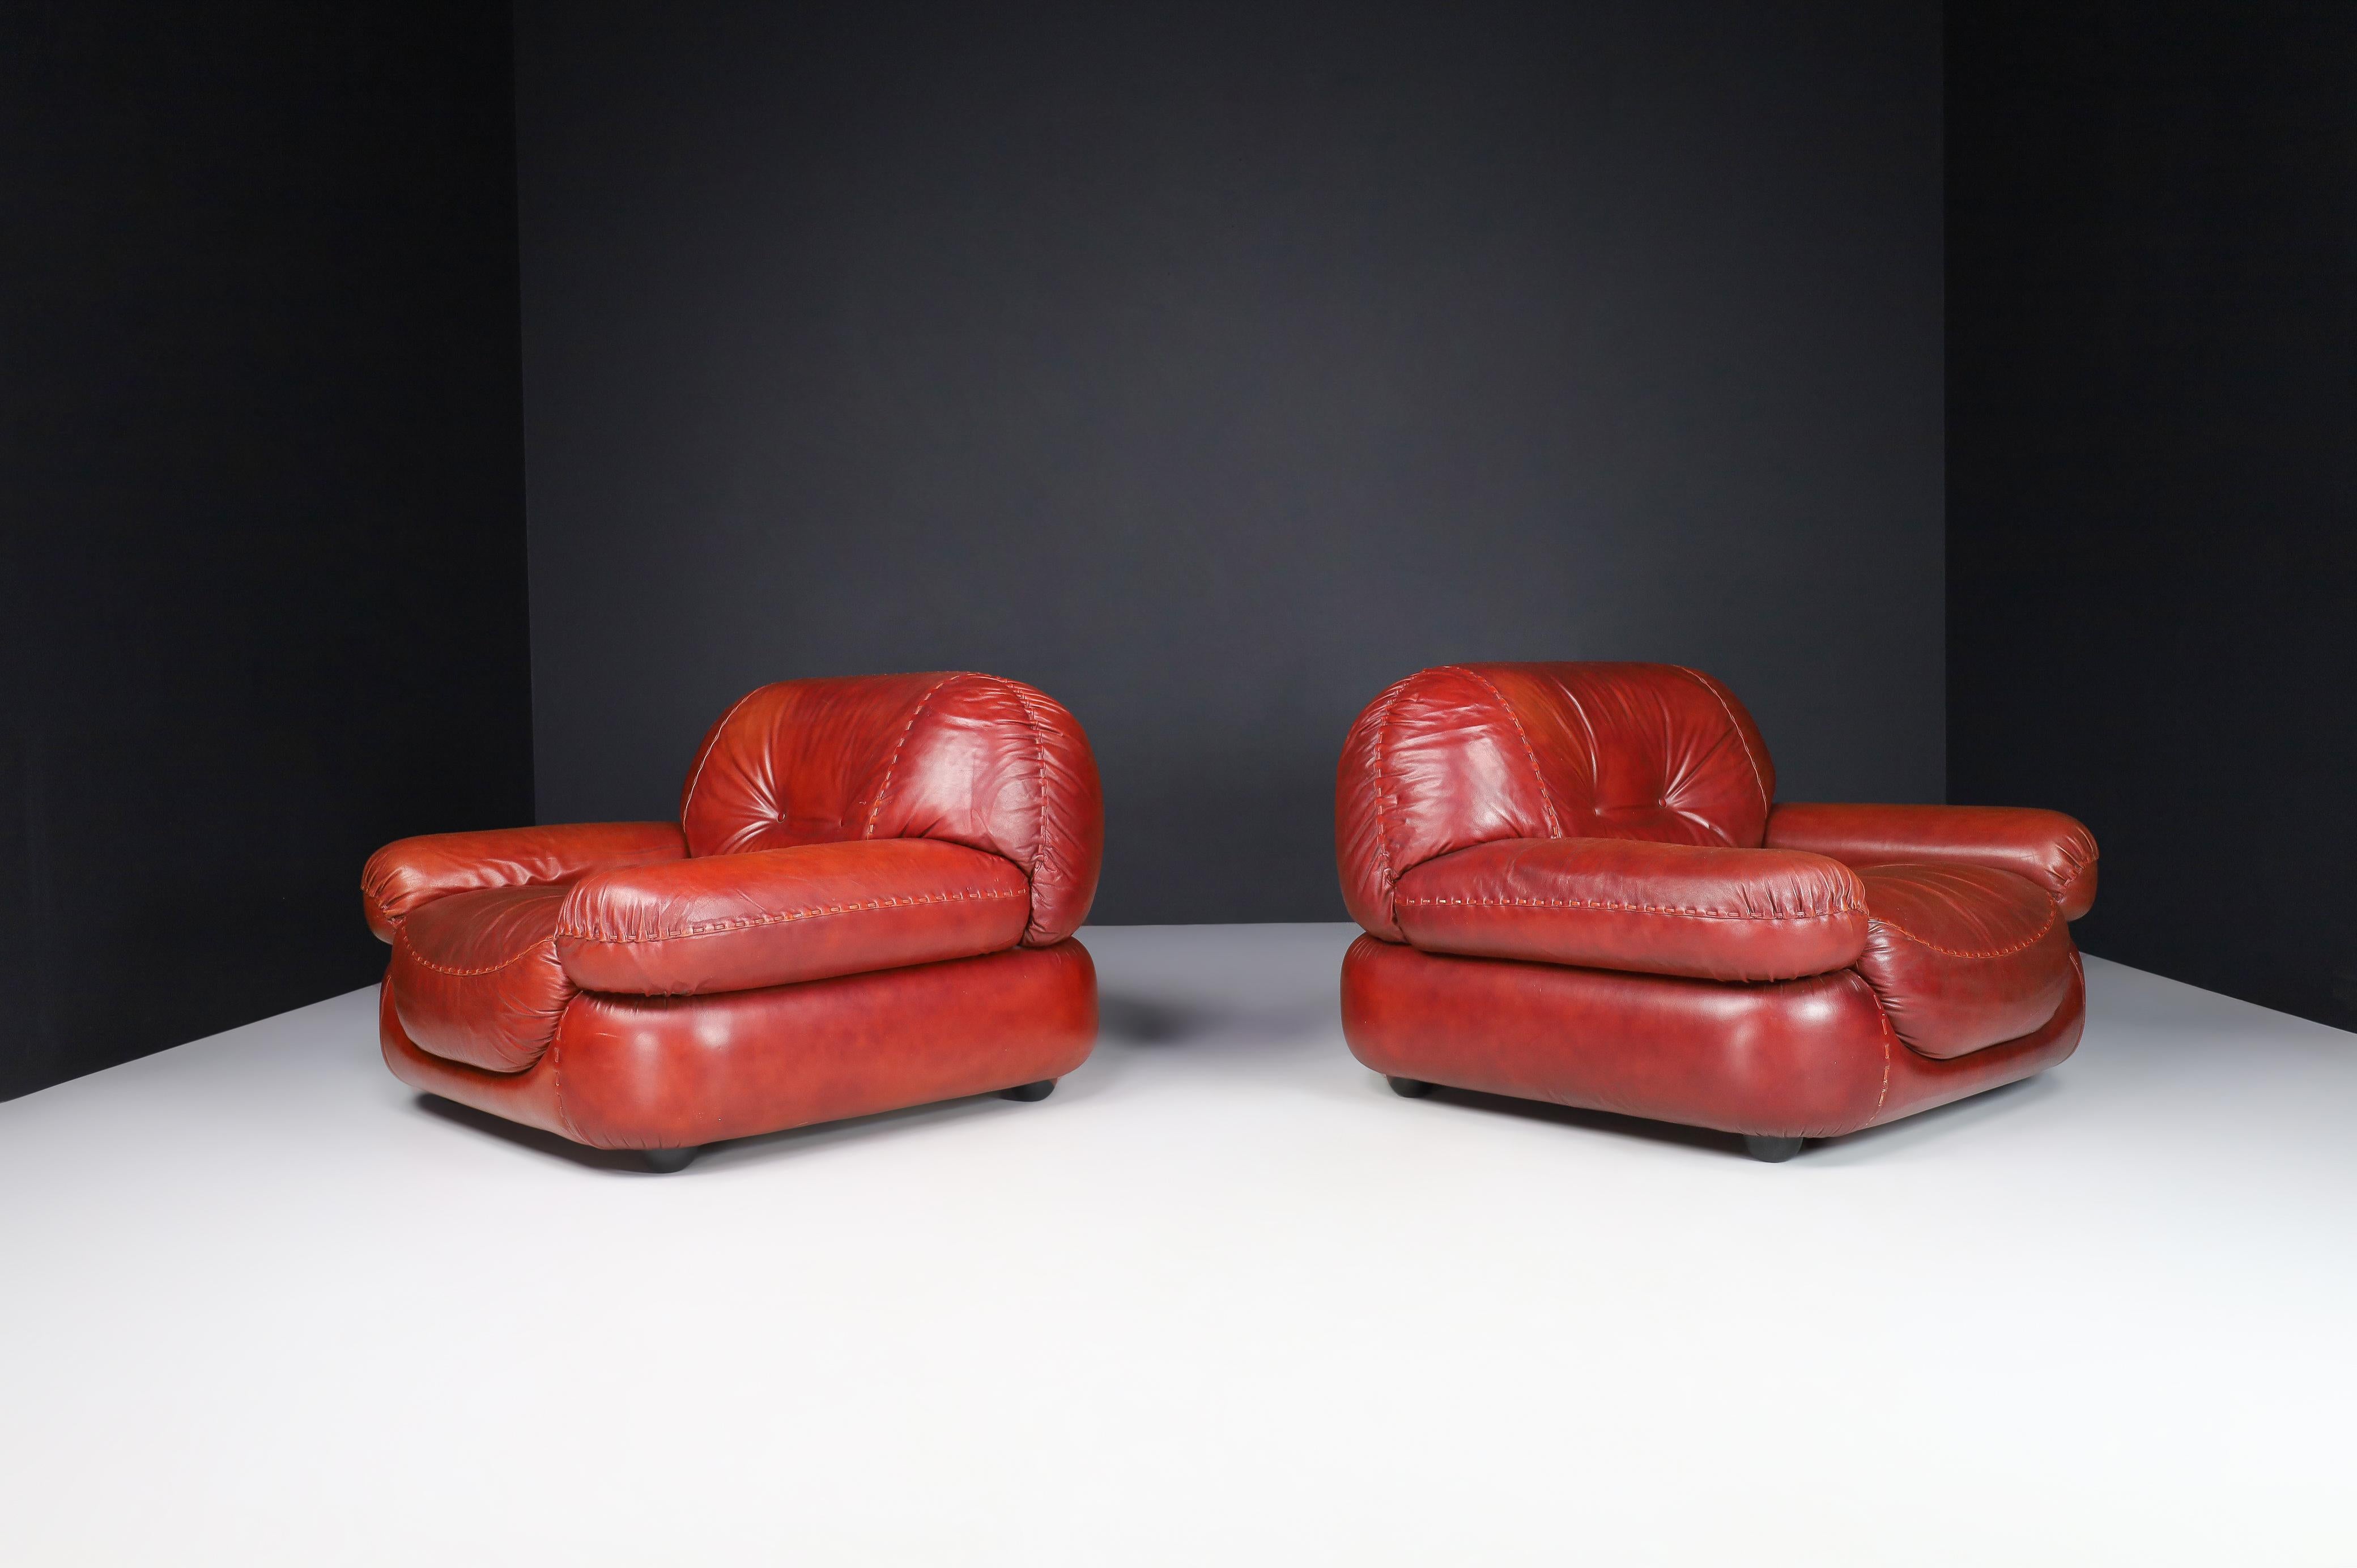 A couple of Lounge Chairs in Leather by Sapporo for Mobil Girgi, Italy 1970

A pair of lounge chairs in fine leather by Sapporo for Mobil Girgi, Italy, in the 1970s. A couple of big, fluffy, stylish lounge armchairs that feature round lines and